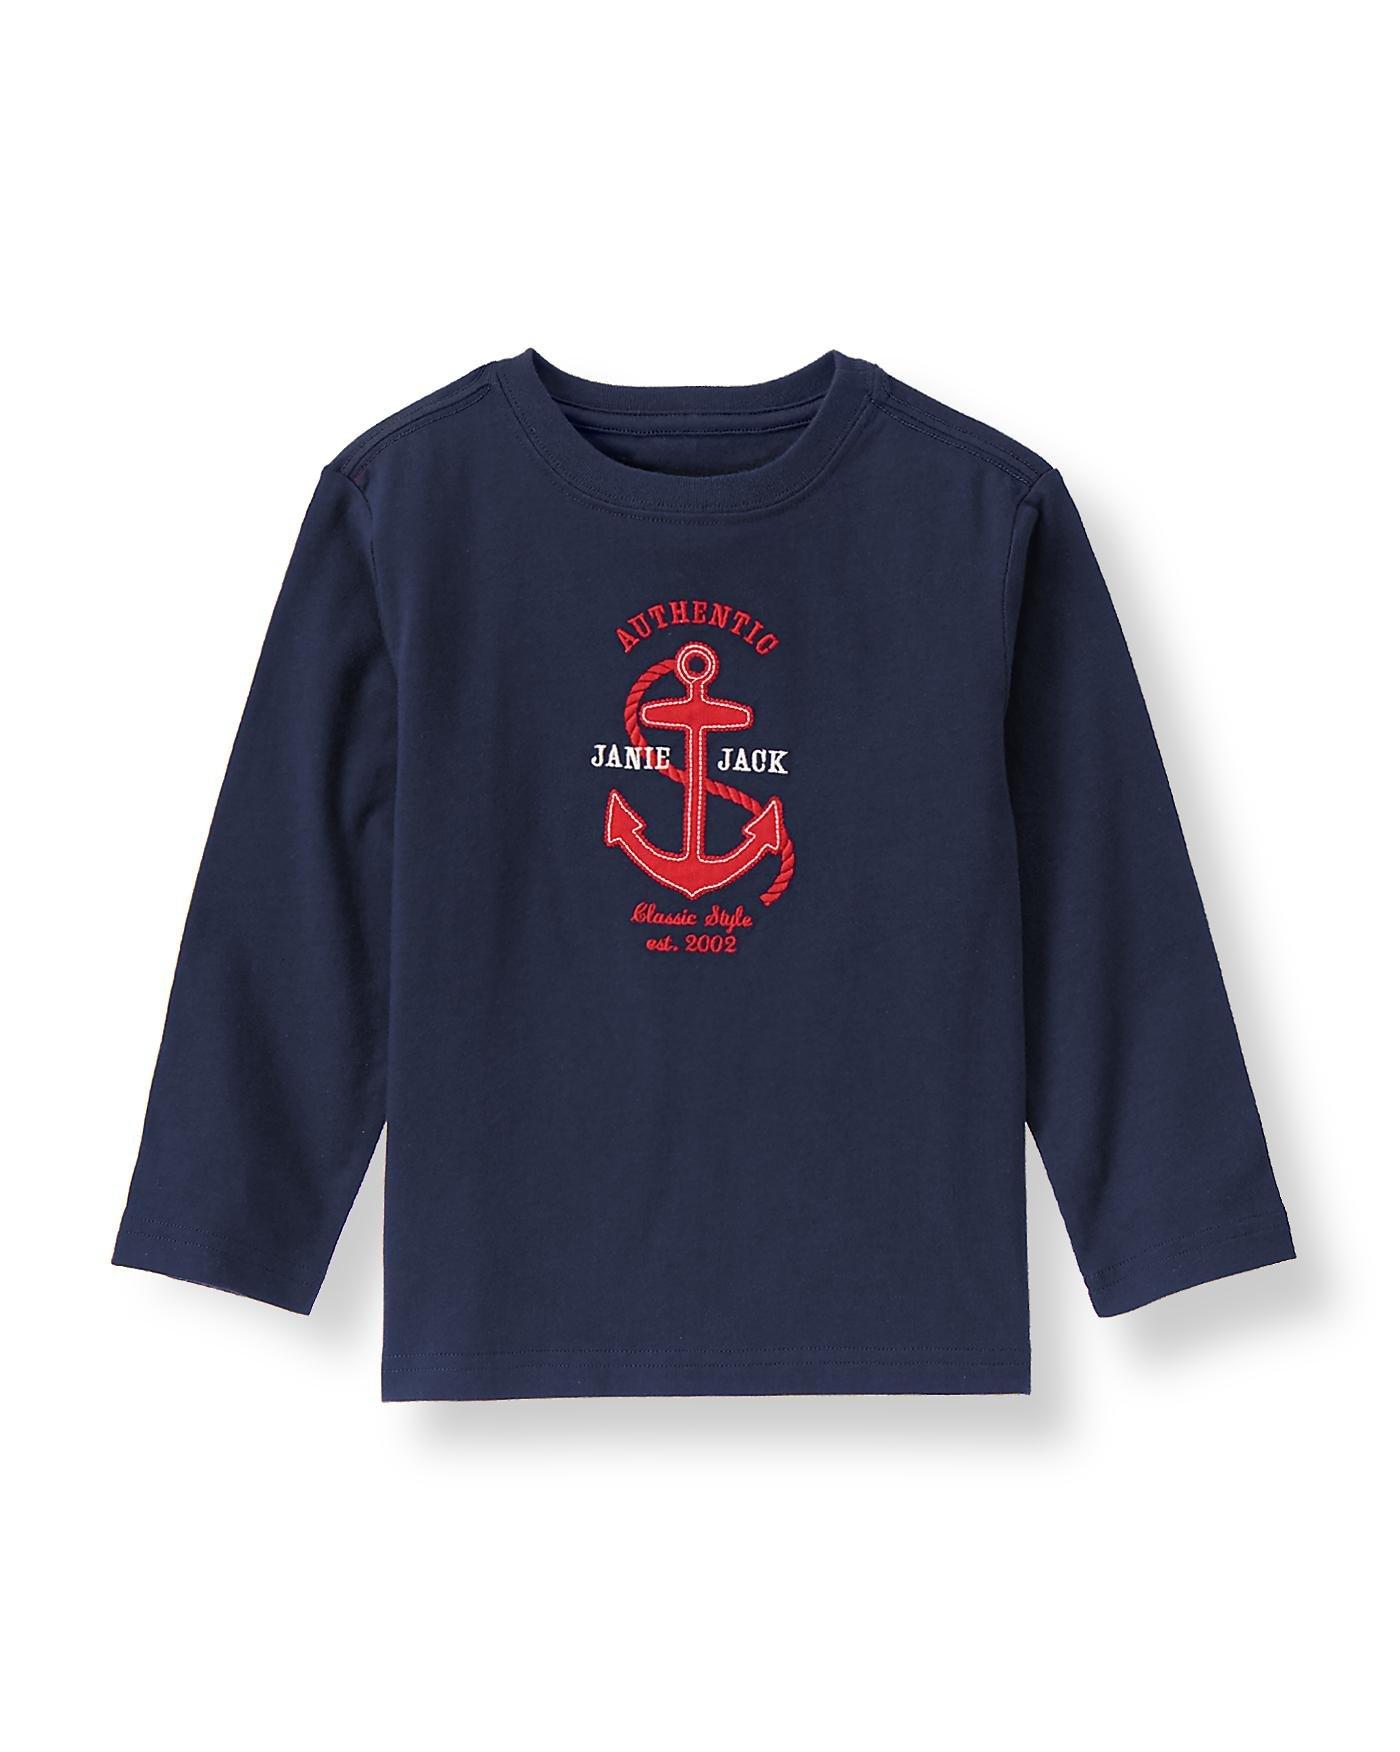 Anchor Tee image number 0